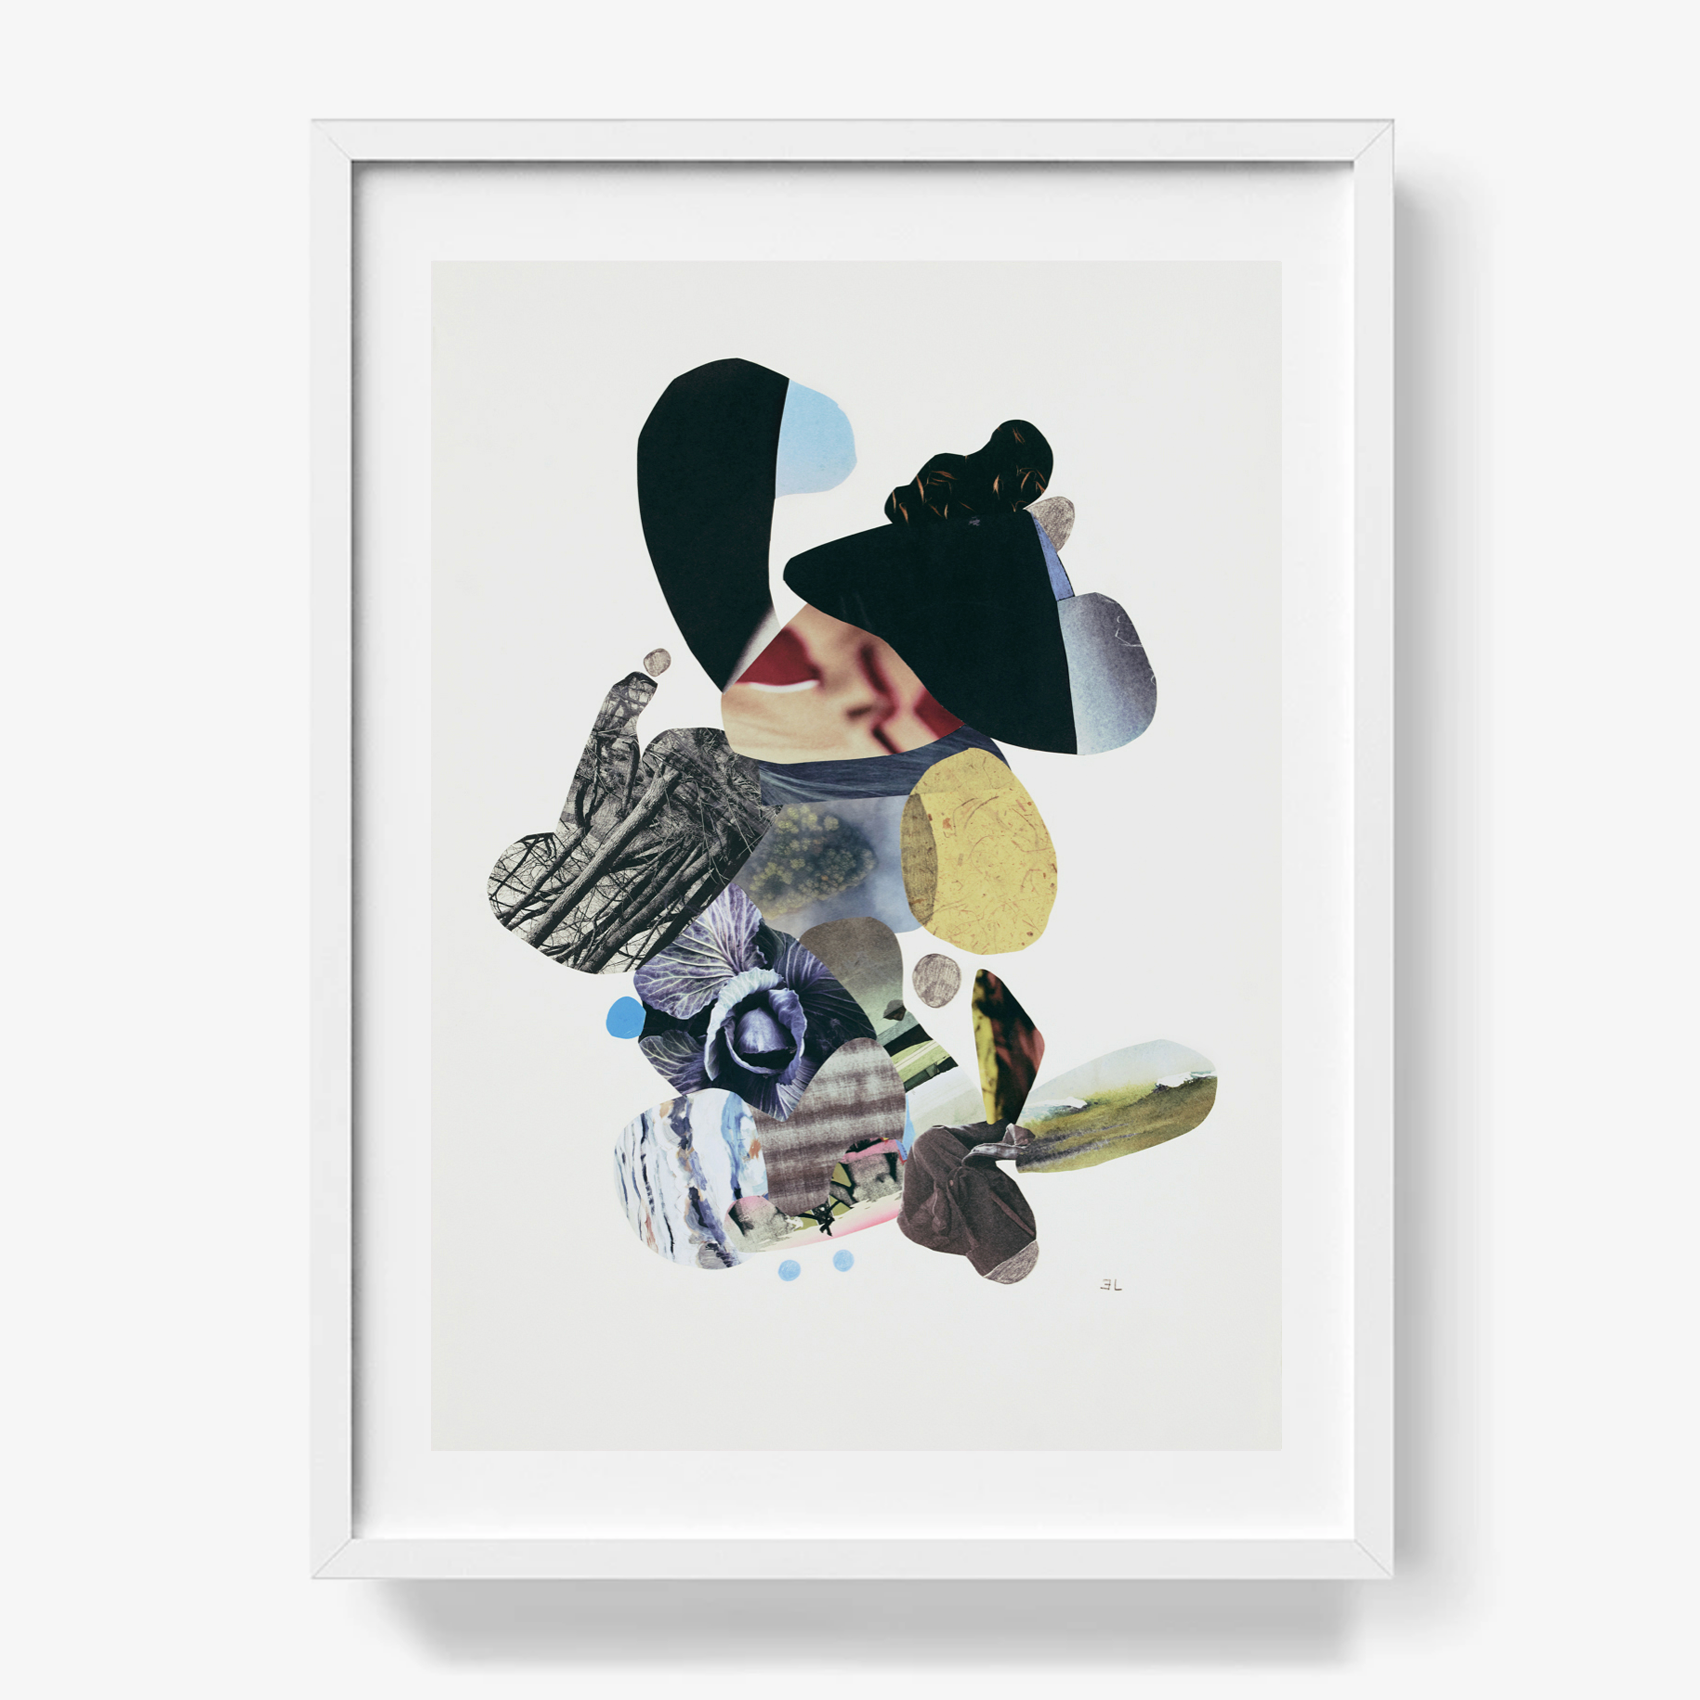 Emma Larsson COLLAGE No. 01 - Limited Edition Print